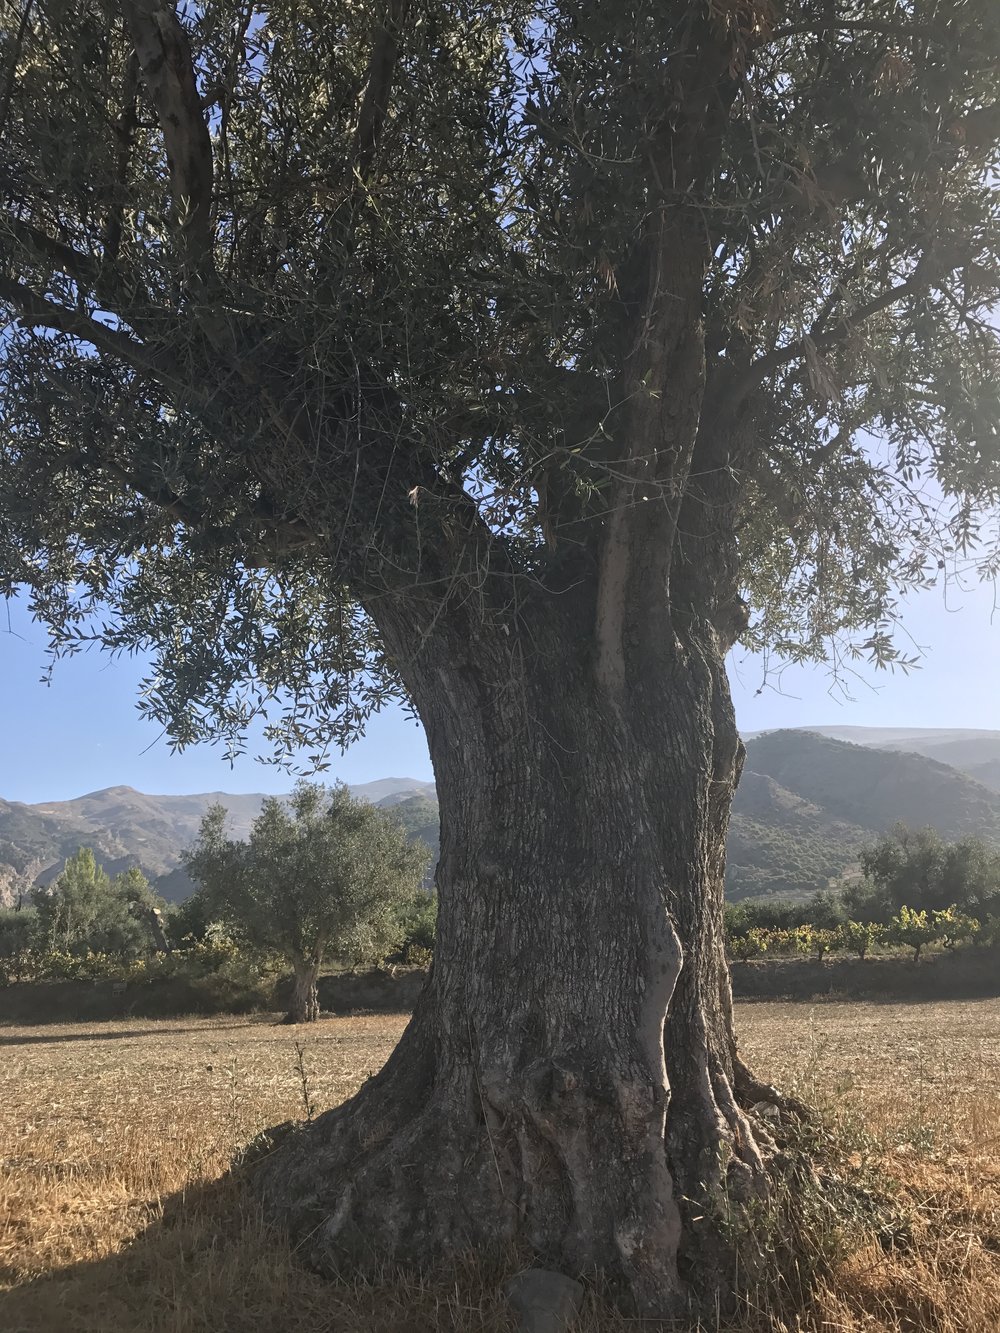 500-year old olive tree